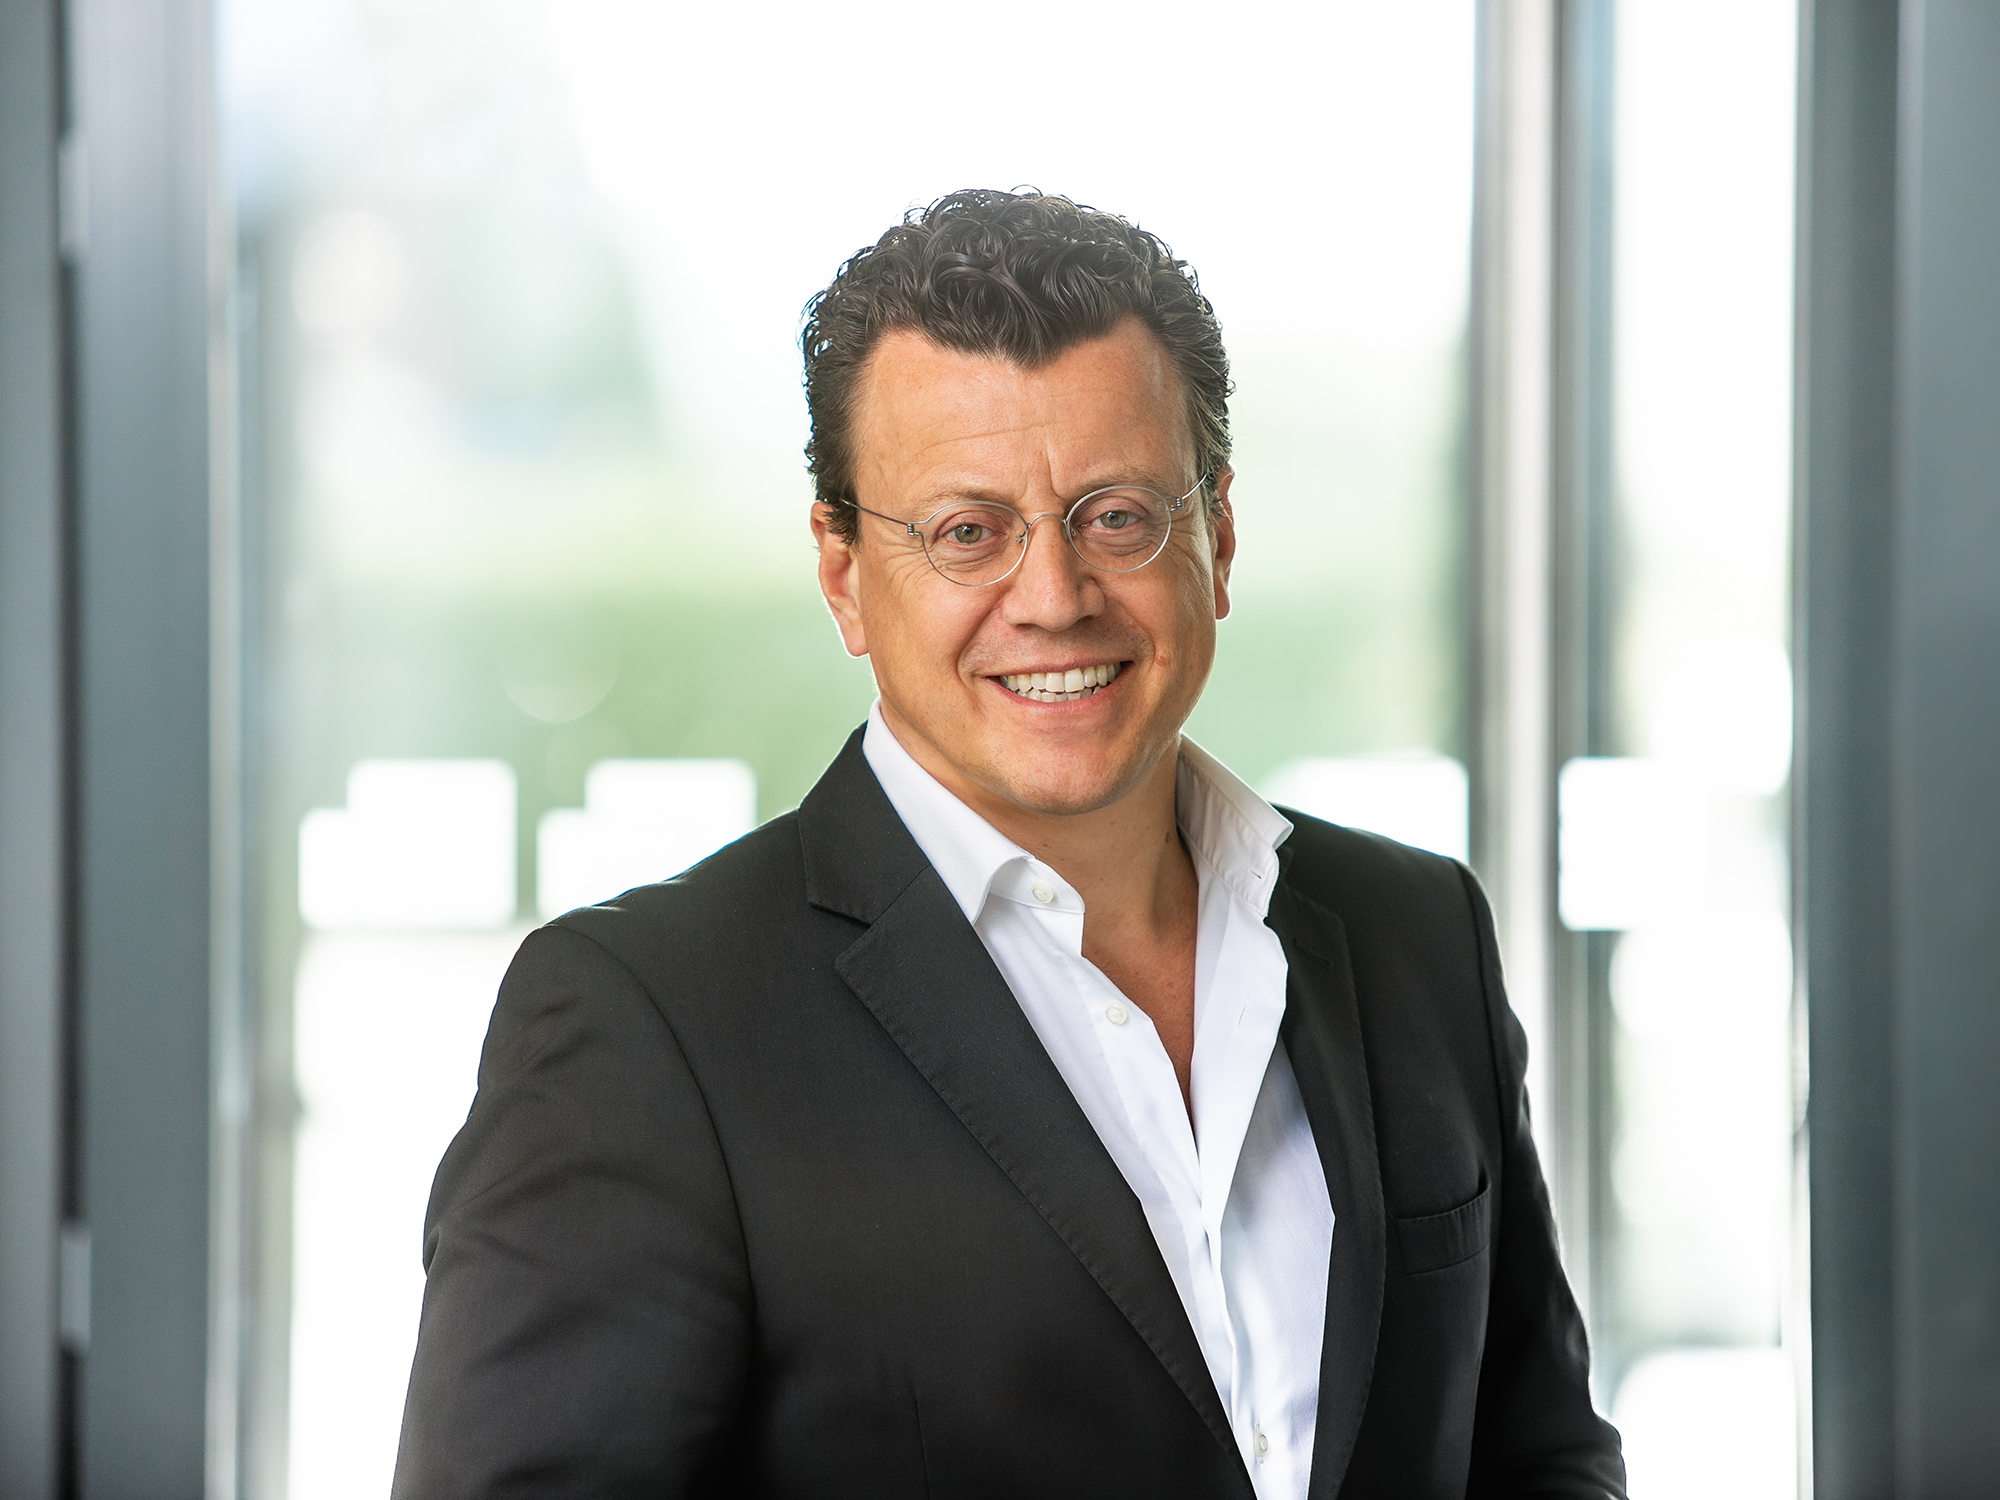 Dr. Steven Althaus, CEO Grenzebach Group